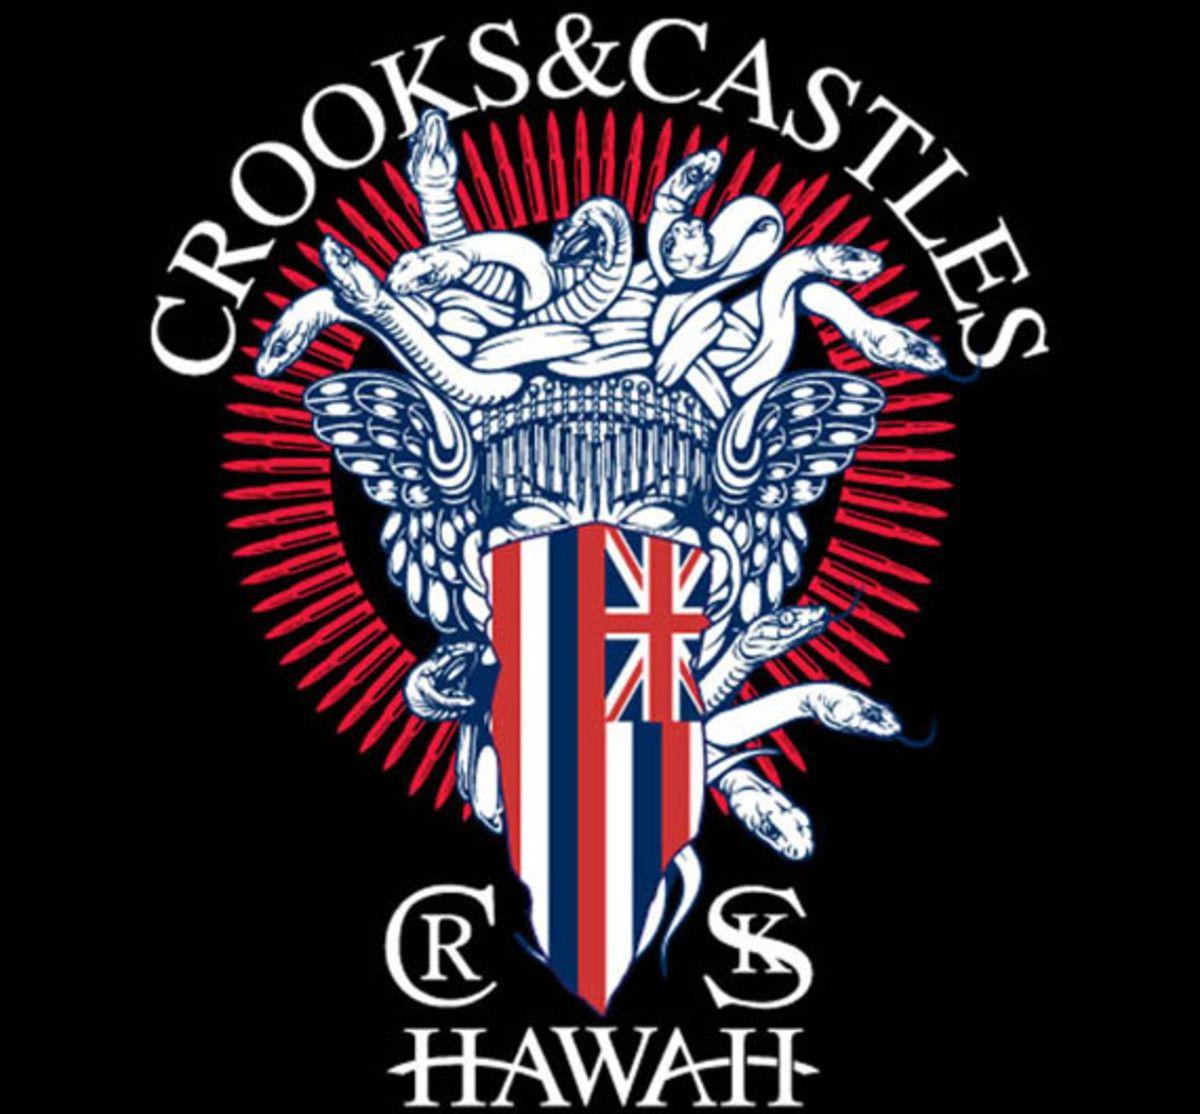 Red Crooks and Castles Logo - Crooks & Castles – Hawaii Store Exclusives + Opening - Freshness Mag